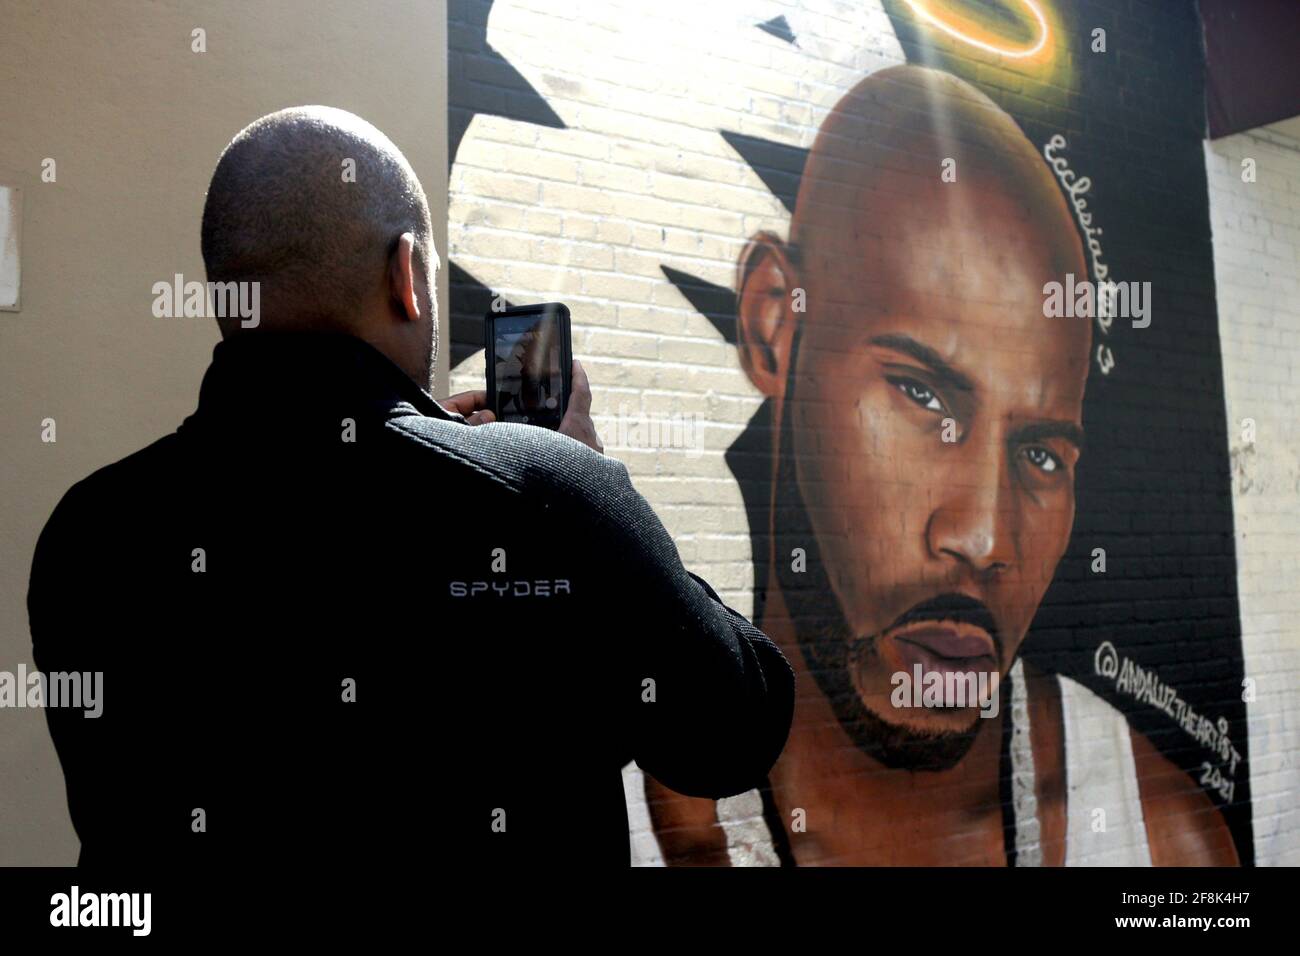 Tribute To Late Rapper DMX In New Mural, New York, NY USA Stock Photo